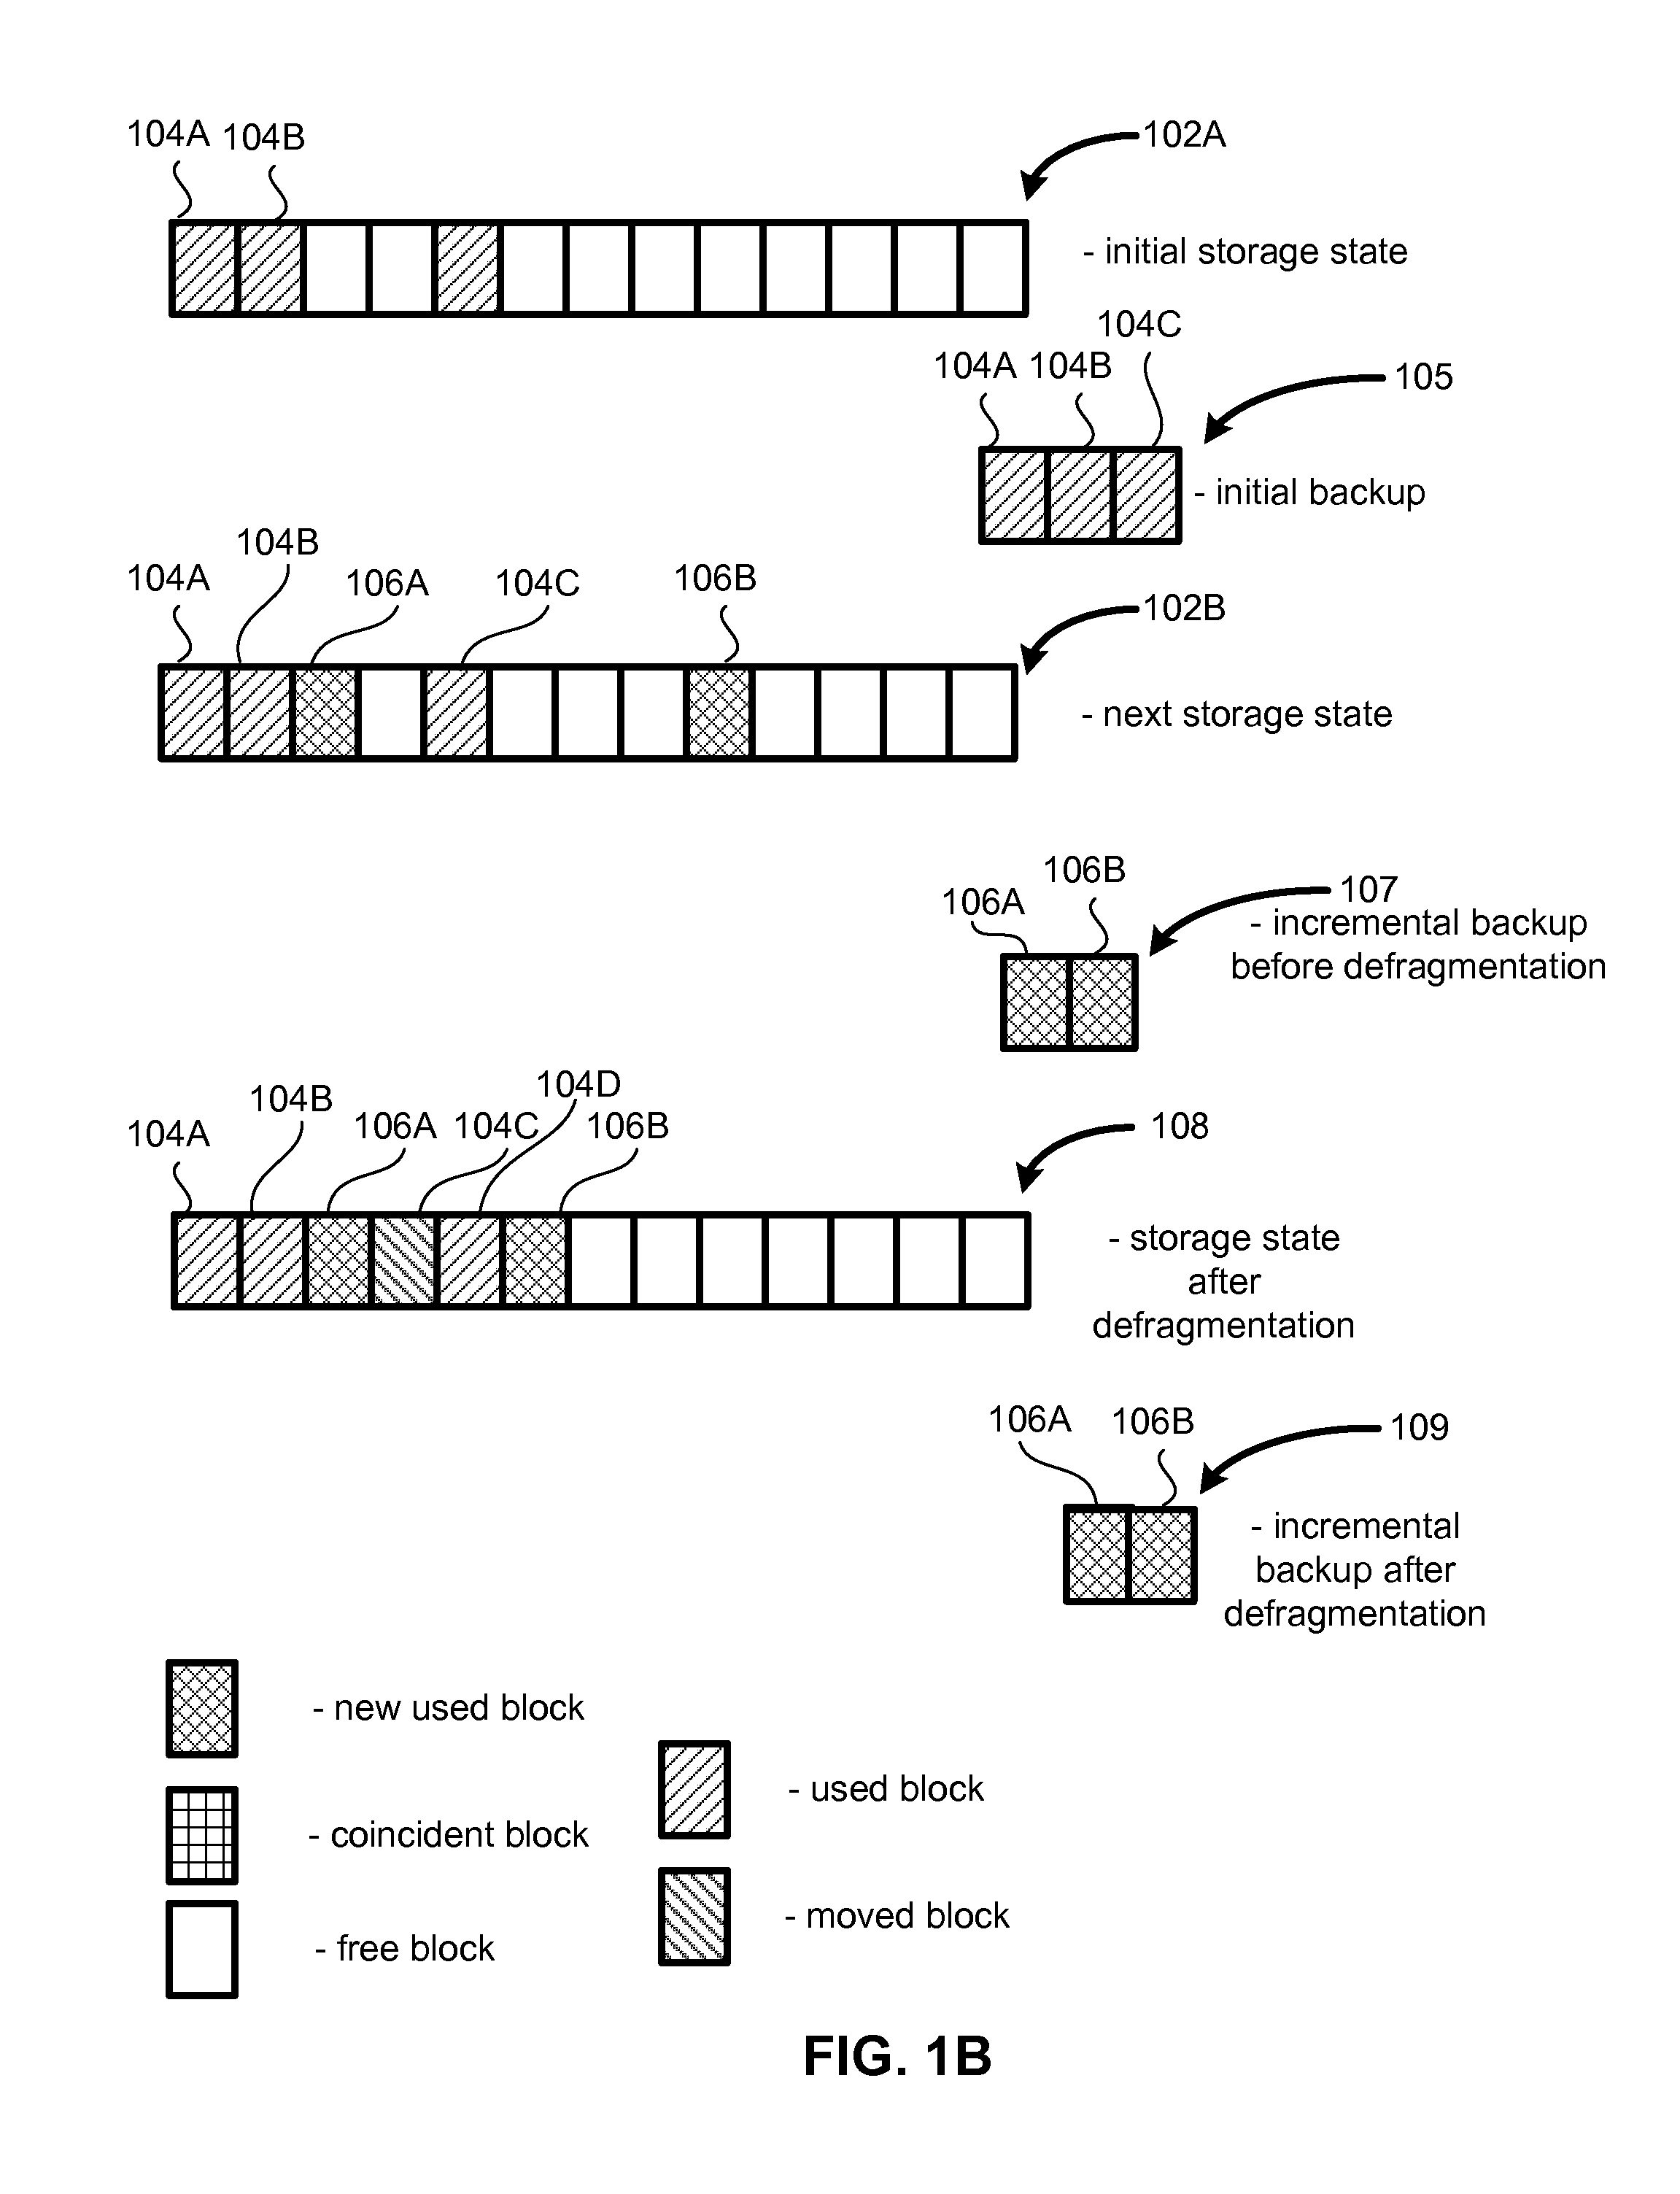 System and method for efficient backup using hashes